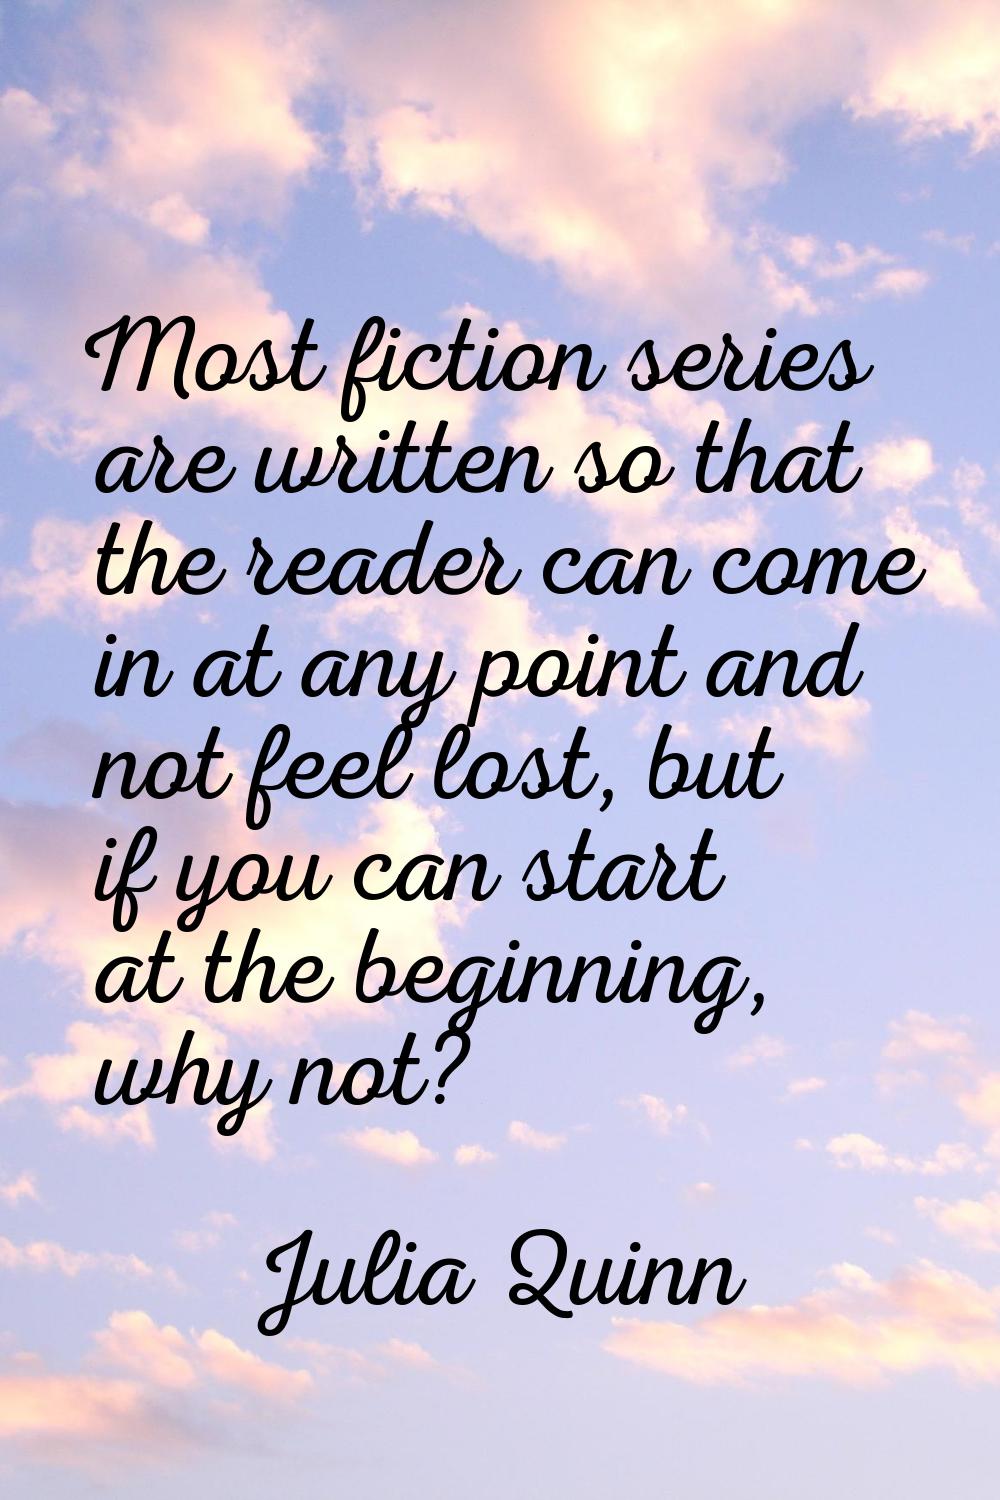 Most fiction series are written so that the reader can come in at any point and not feel lost, but 